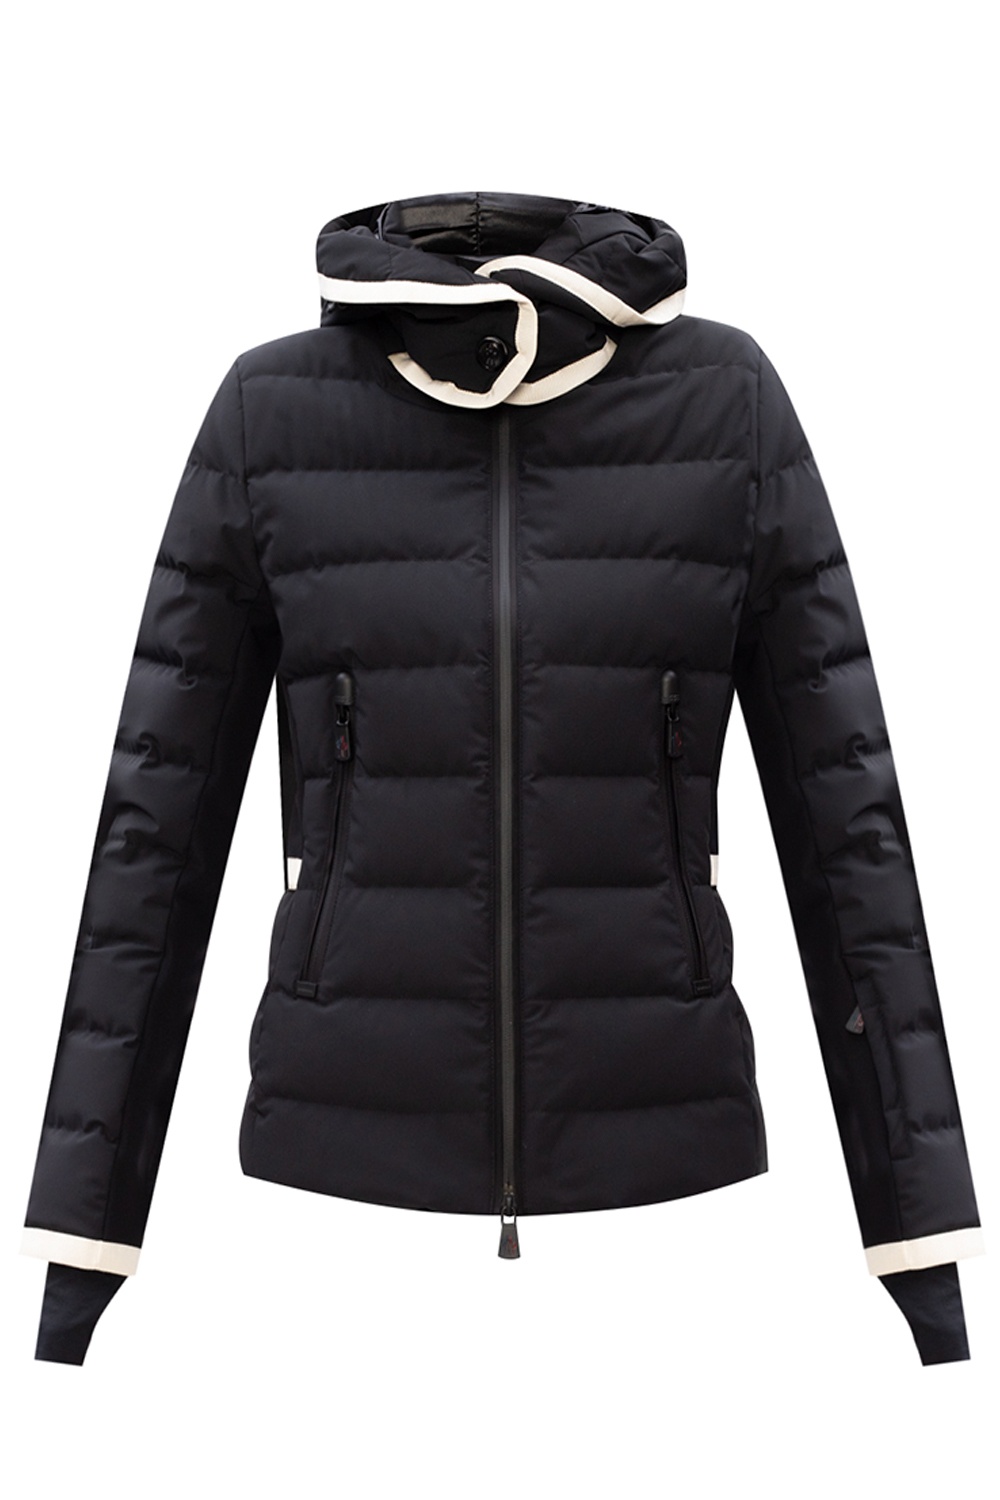 Lamoura' quilted down jacket Moncler Grenoble - Vitkac US